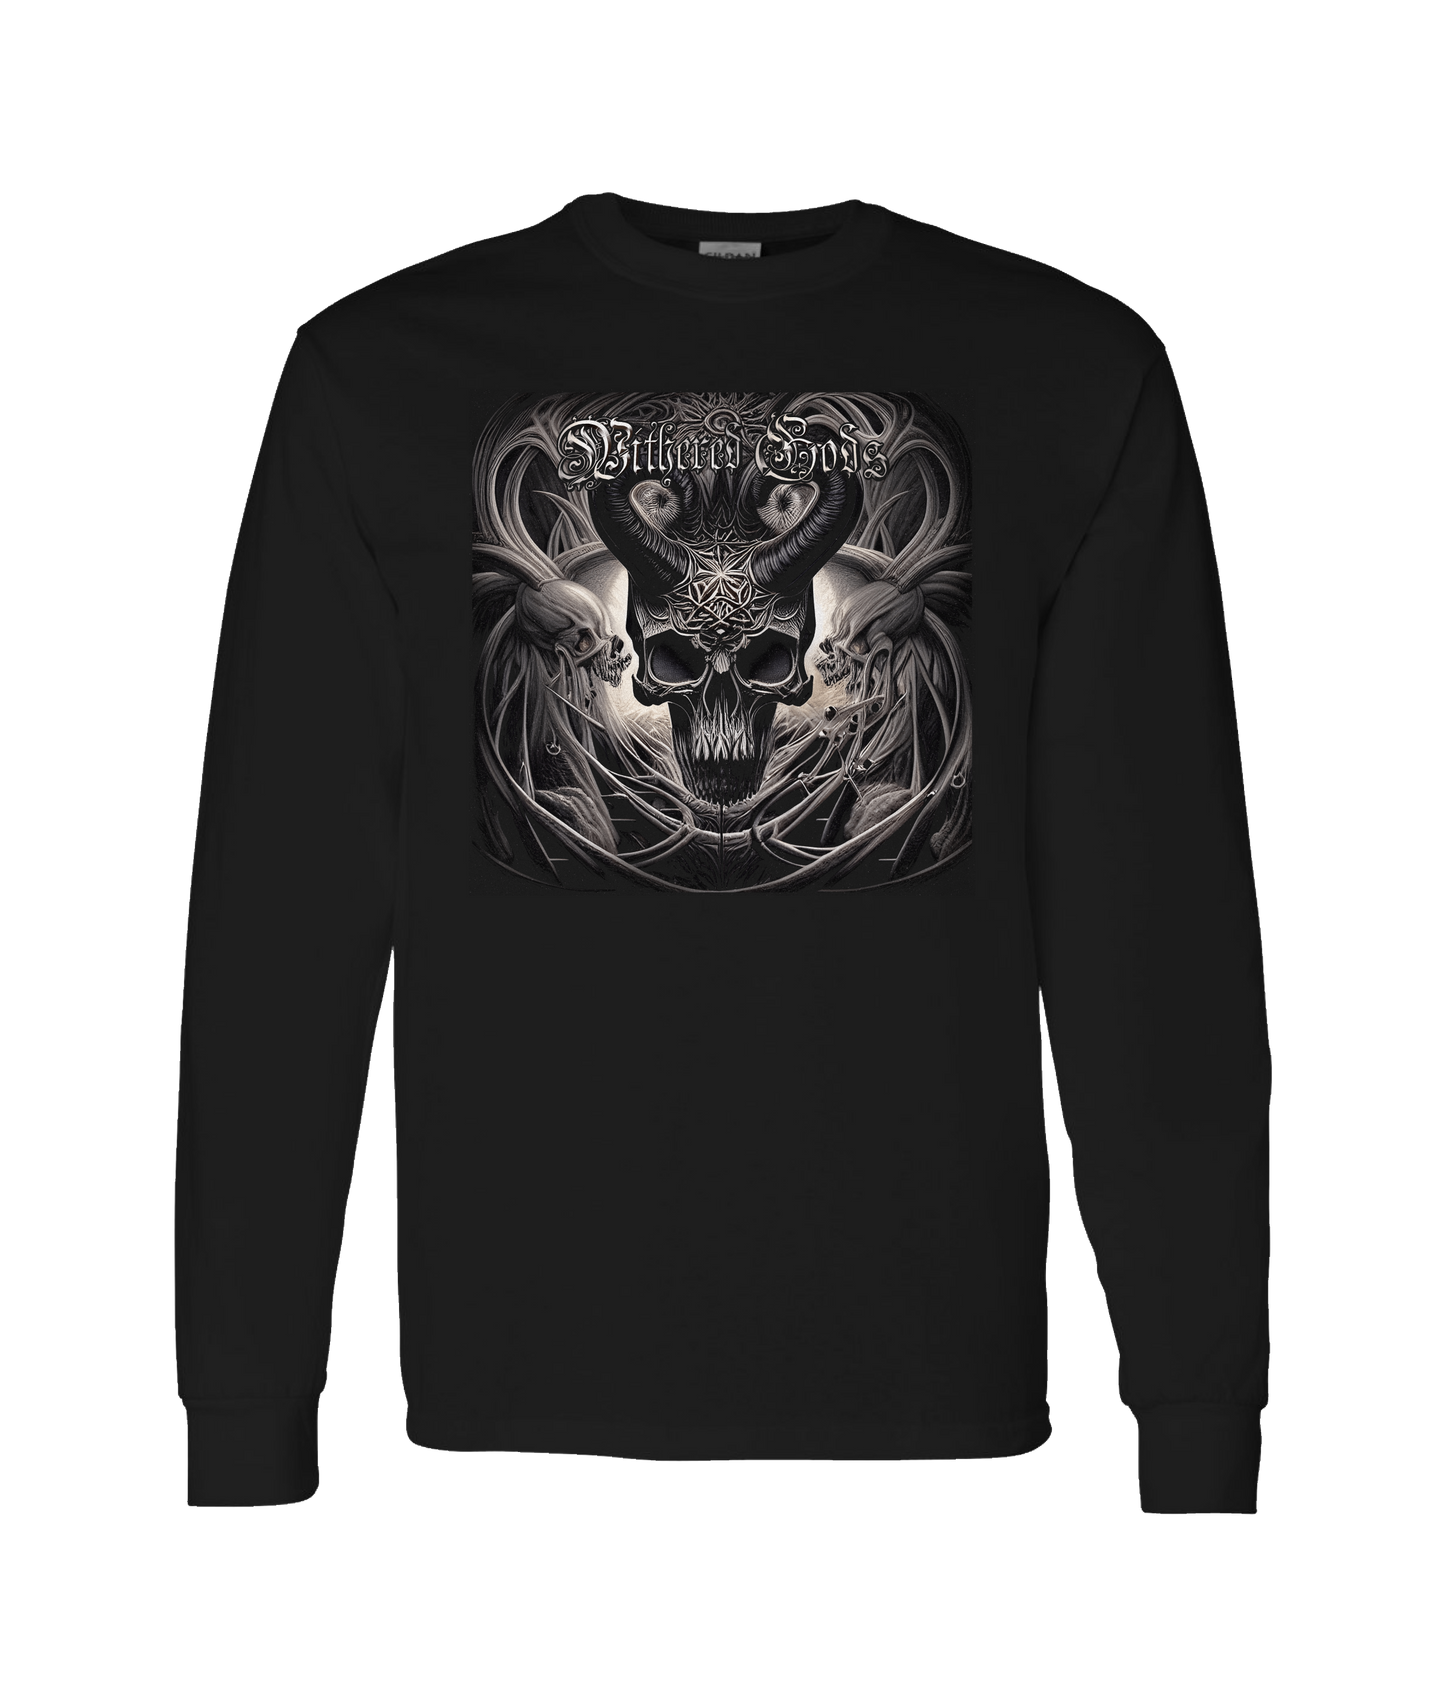 Withered Gods - The Rite to Death - Black Long Sleeve T